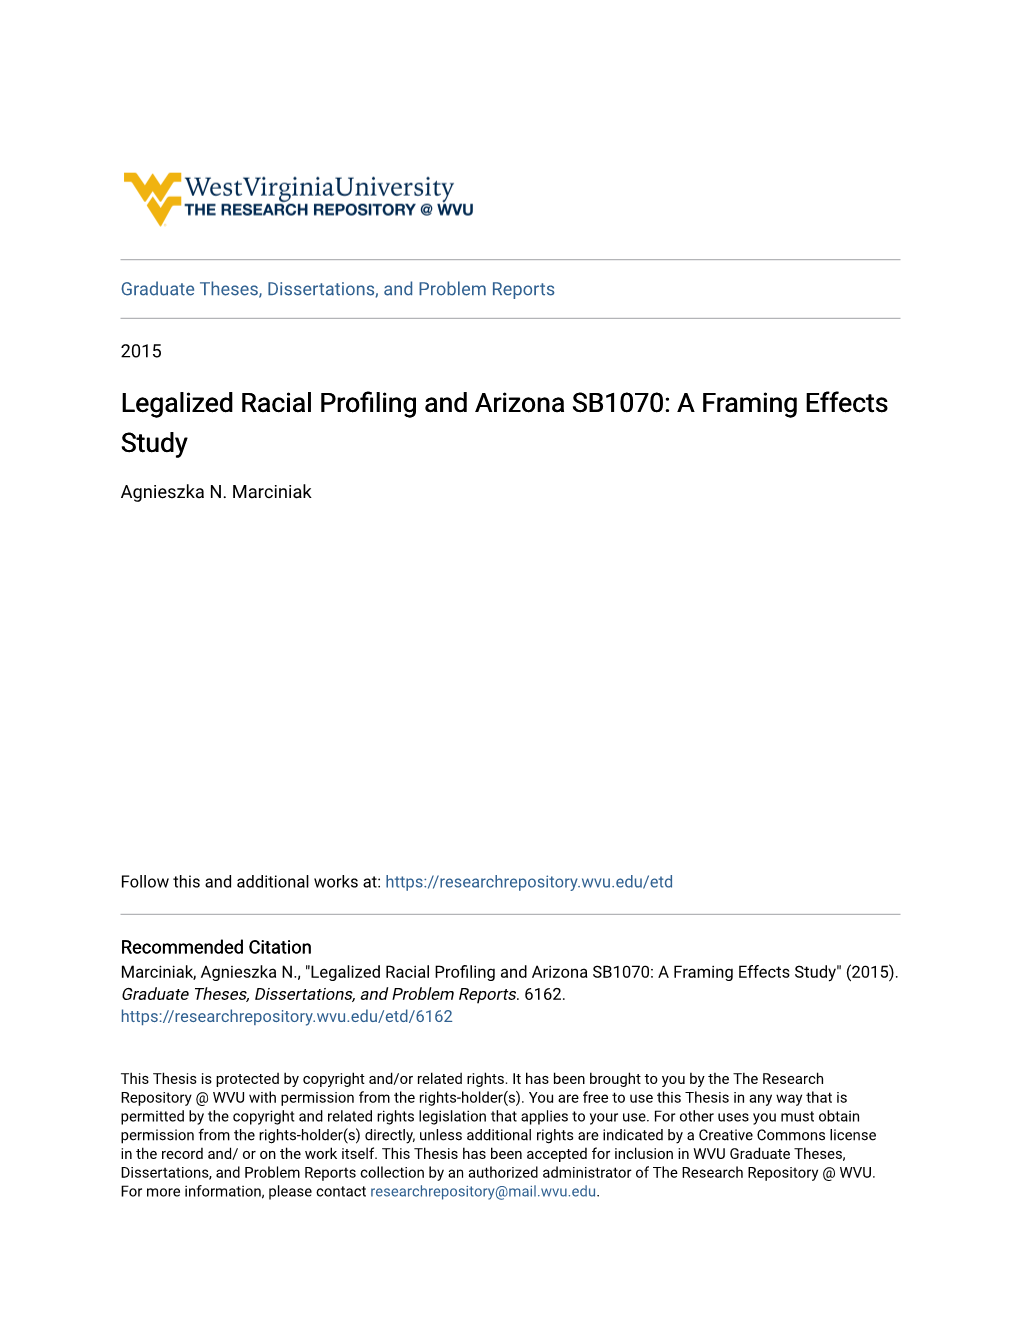 Legalized Racial Profiling and Arizona SB1070: a Framing Effects Study